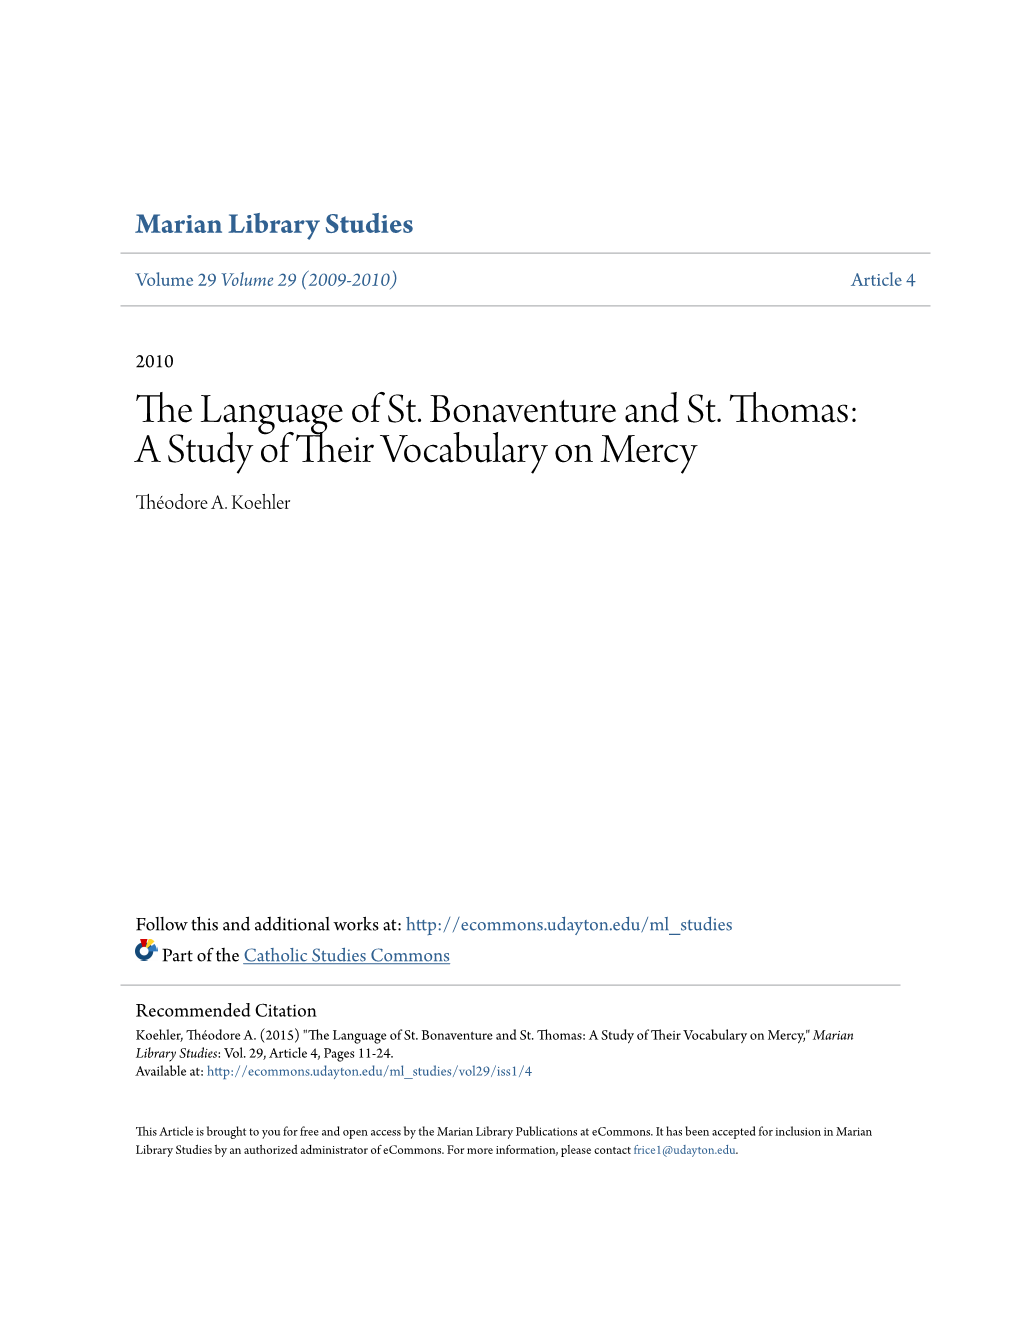 The Language of St. Bonaventure and St. Thomas: a Study of Their Ov Cabulary on Mercy Théodore A